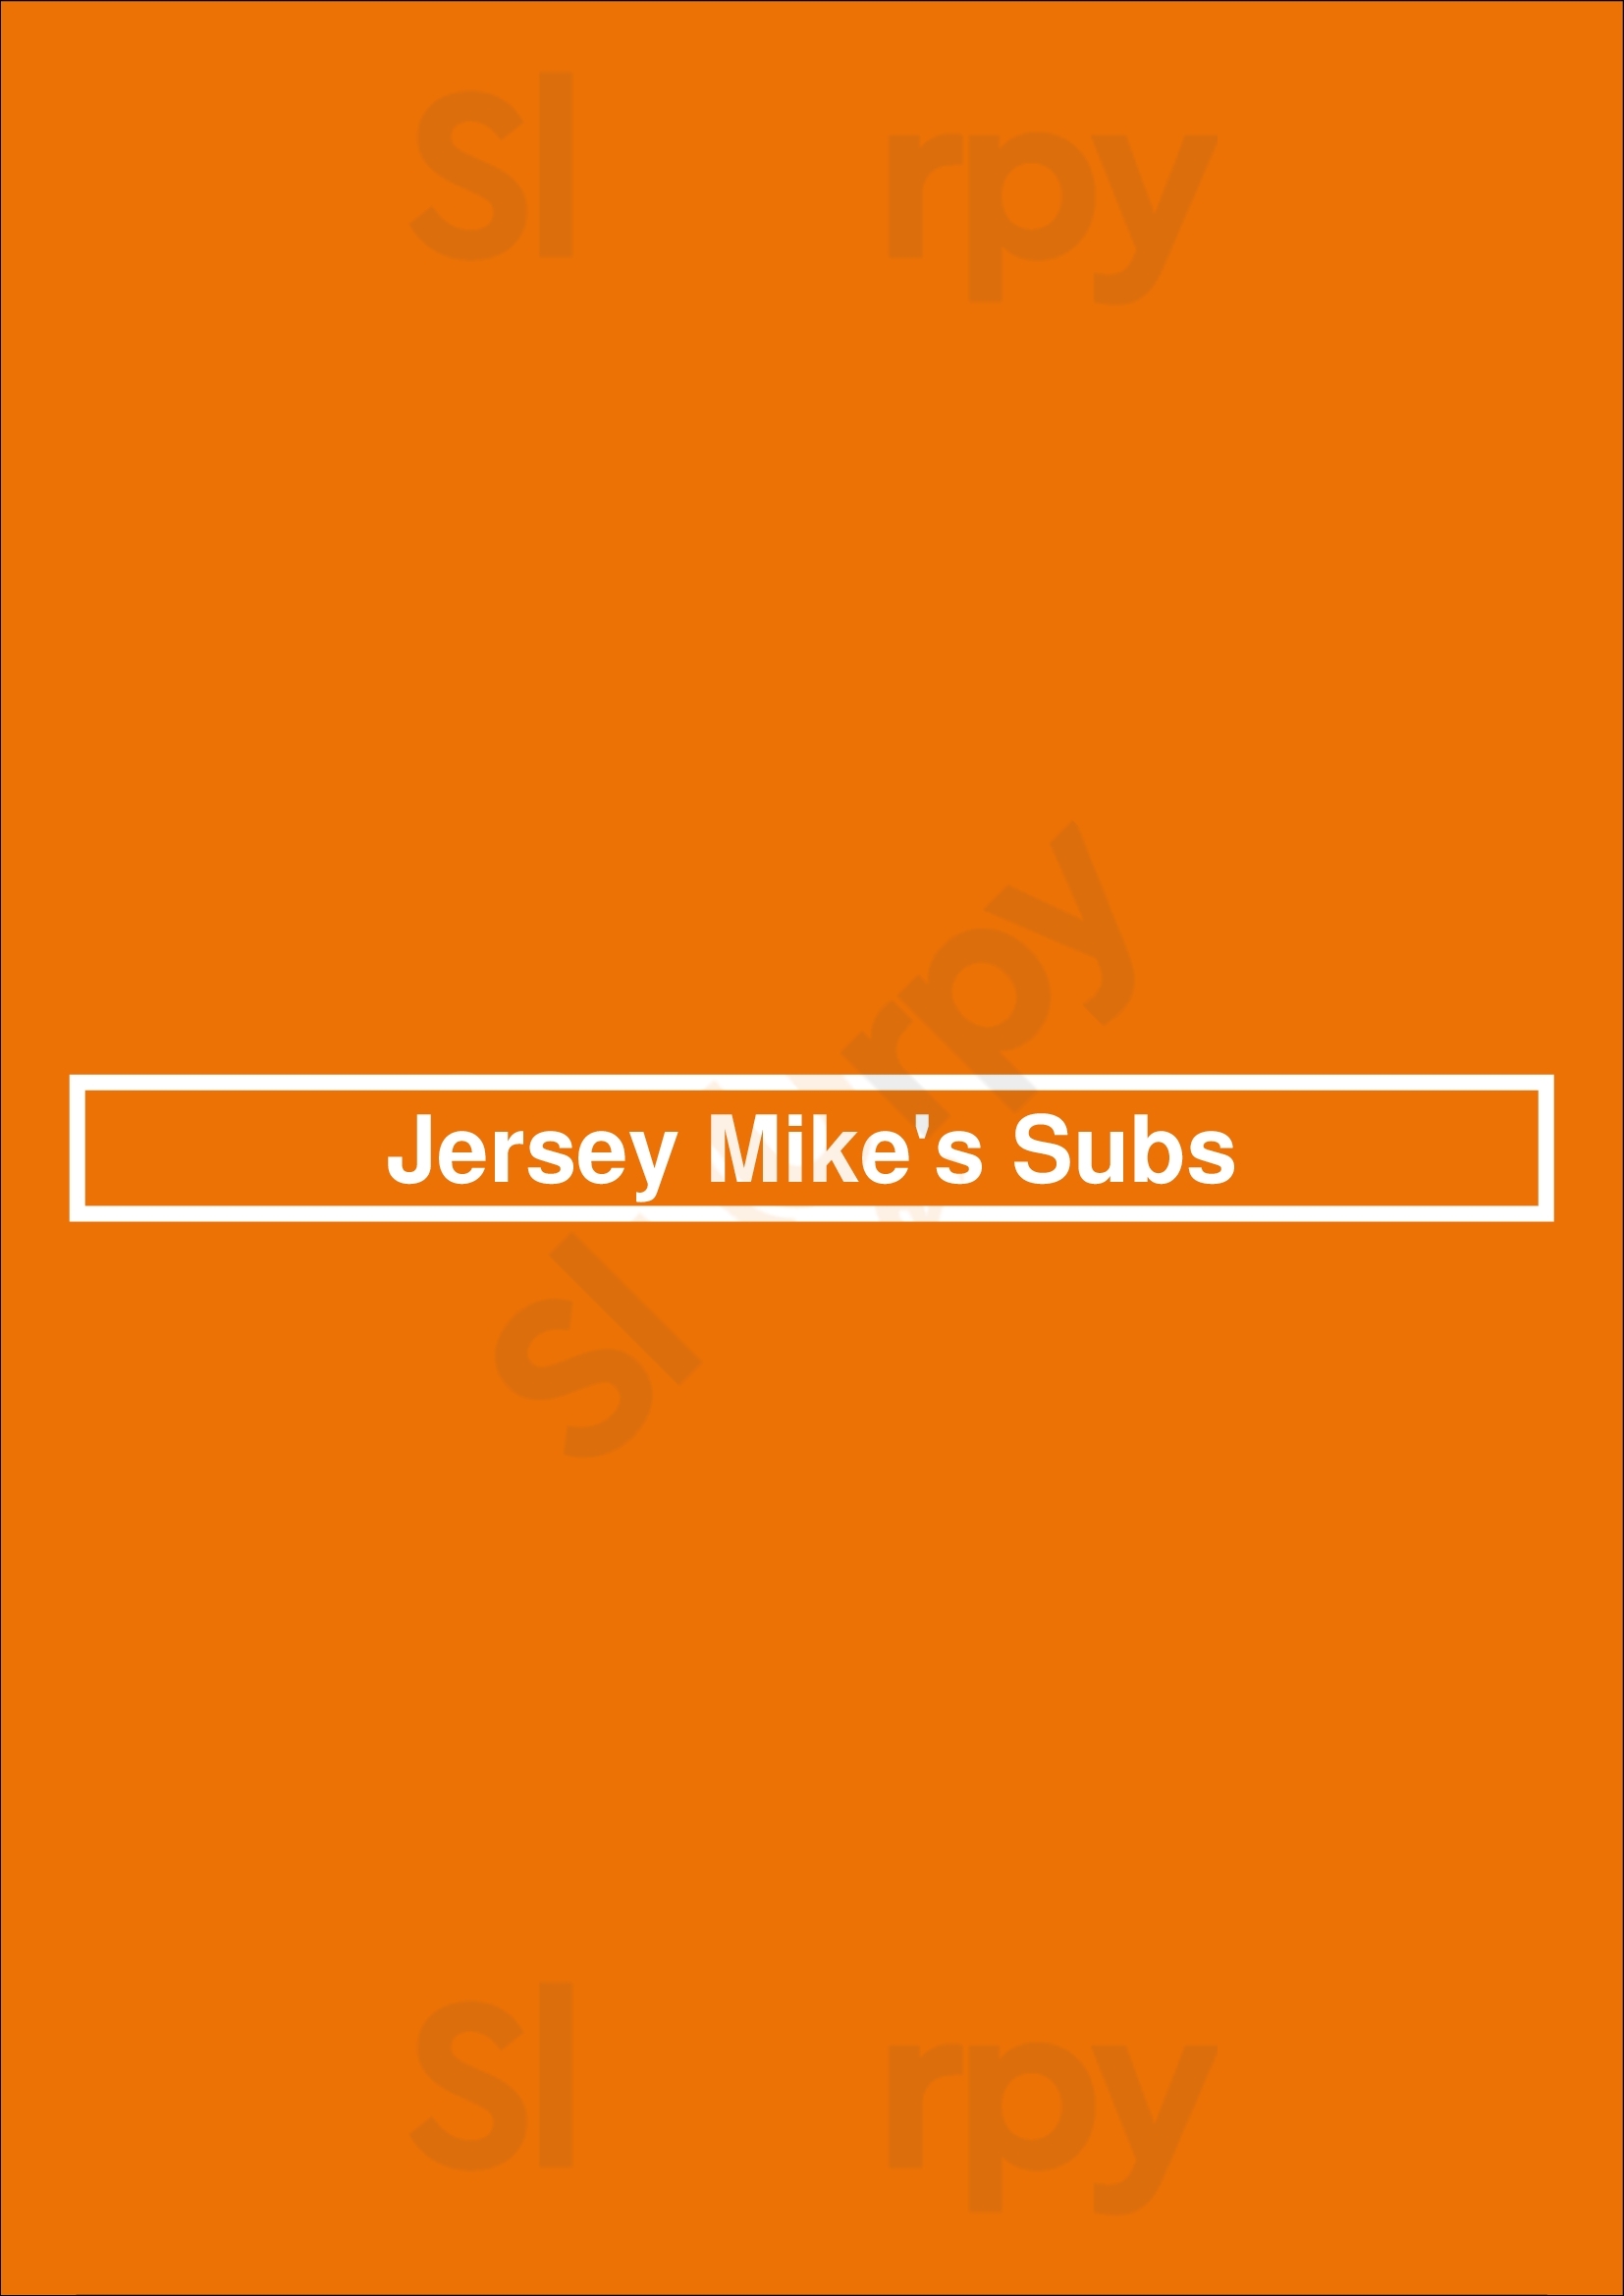 Jersey Mike's Subs Whittier Menu - 1